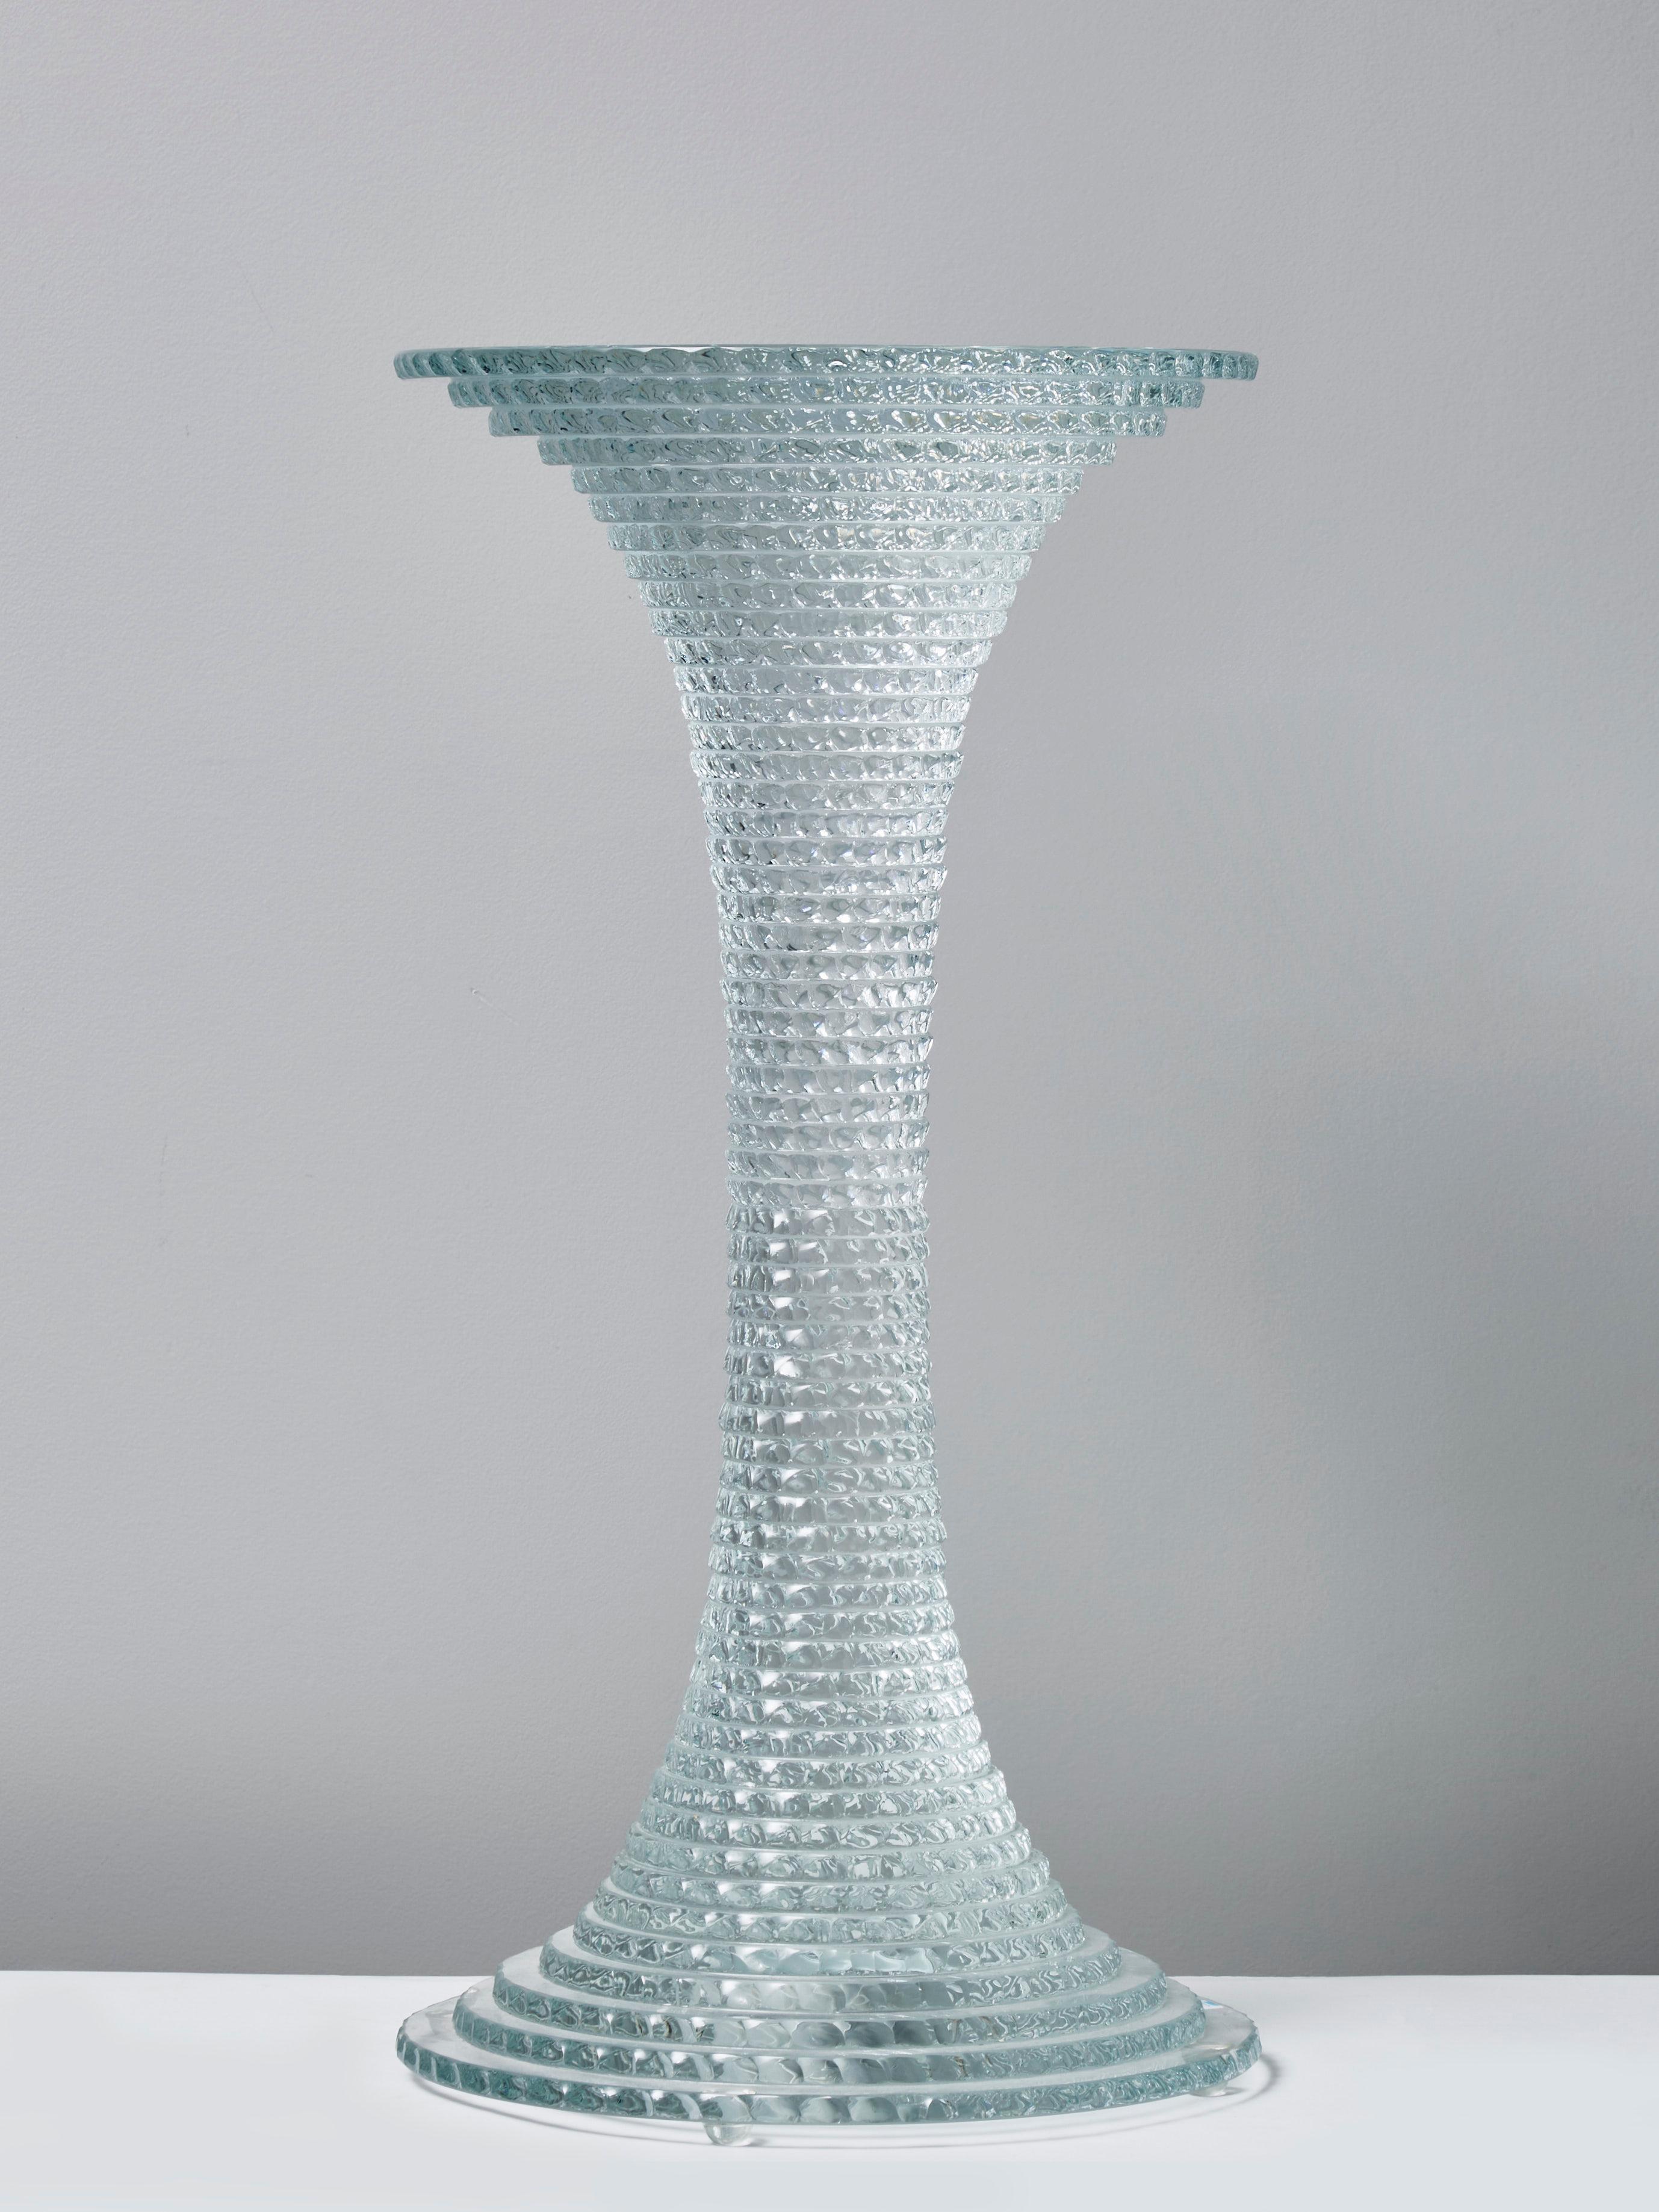 Lamp in sculpted glass, numbered and signed by the french artist Laurent Beyne.